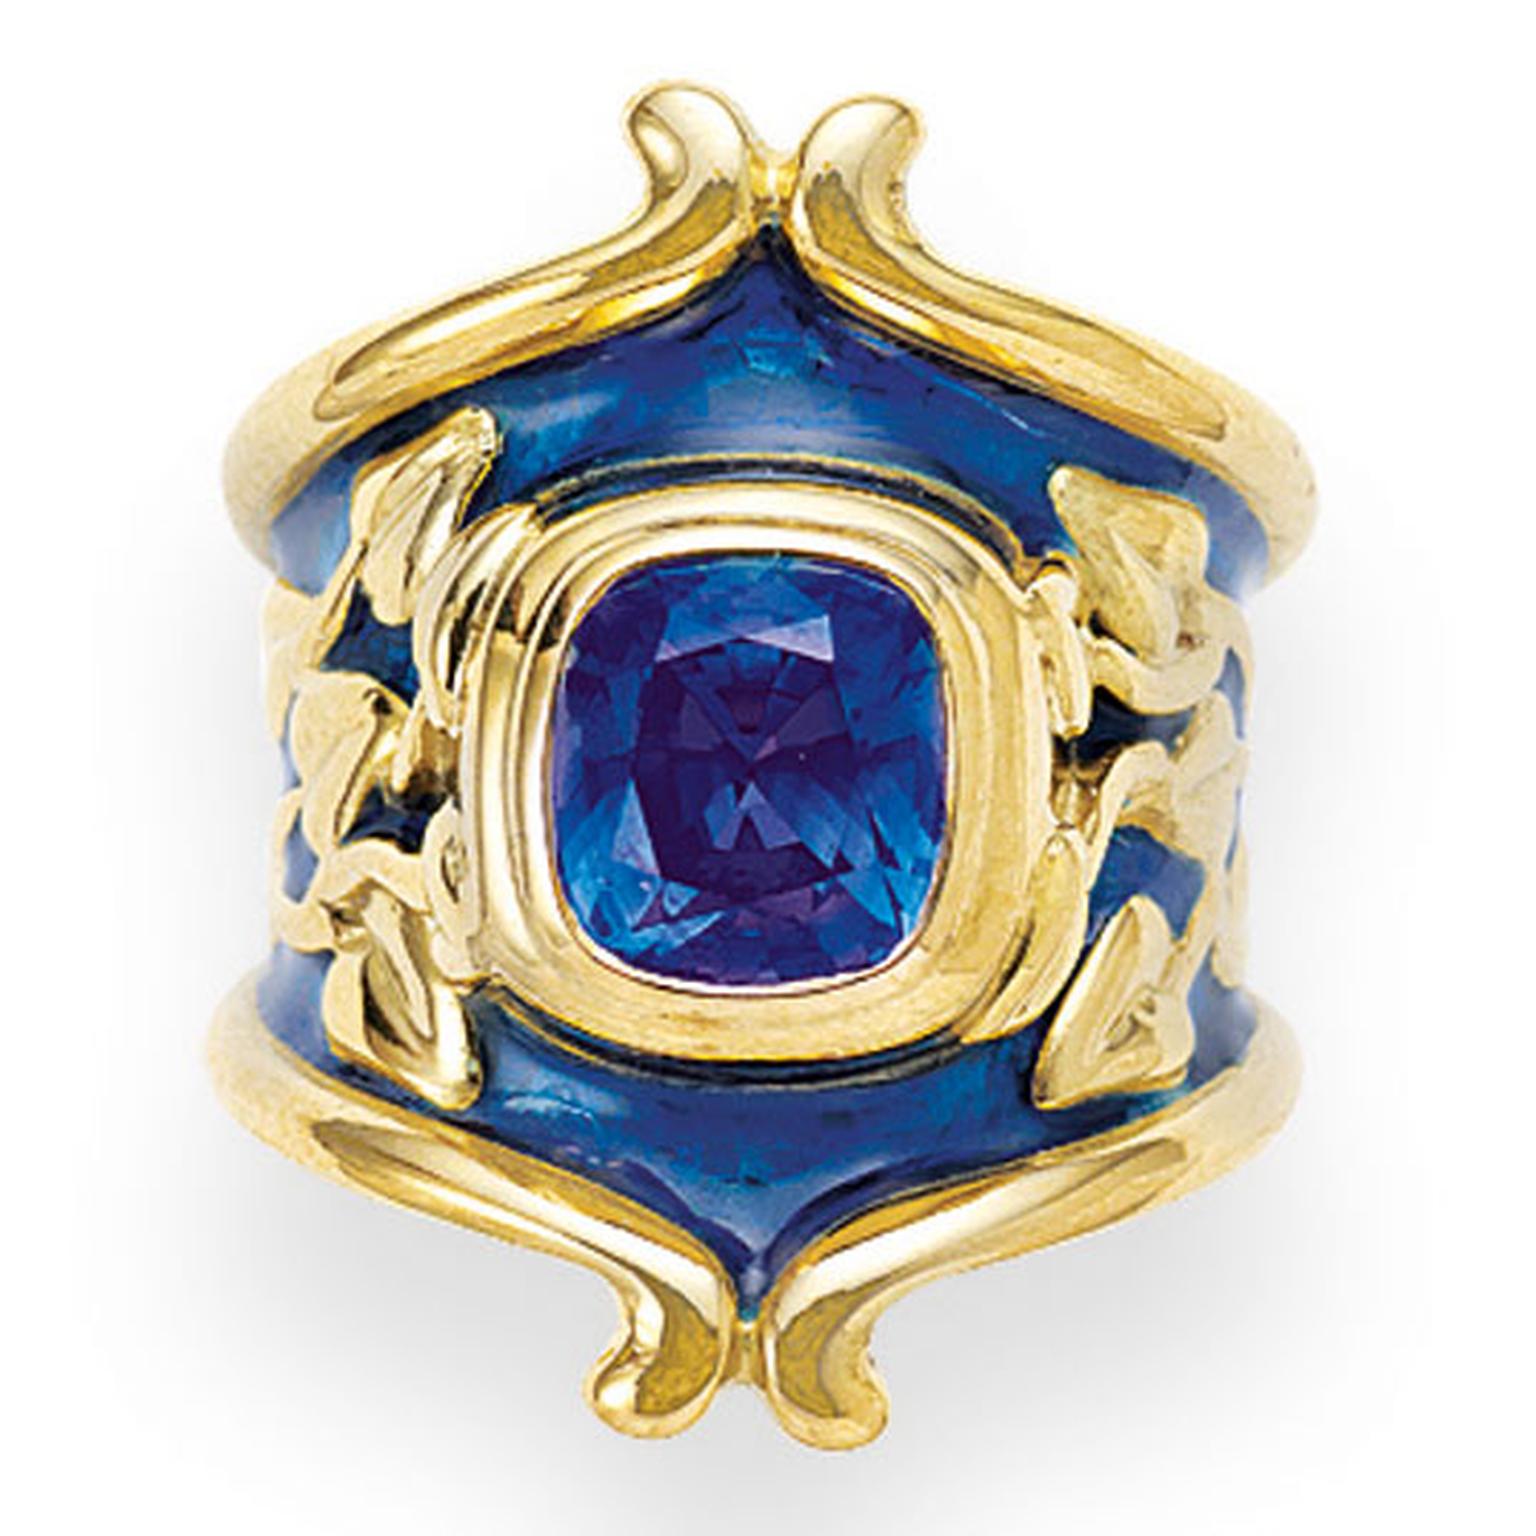 ELIZABETH GAGE, Heliotrope Ring, deep blue sapphire with Royal blue enamel, decorated with carved gold myrtle leaves. £18,600